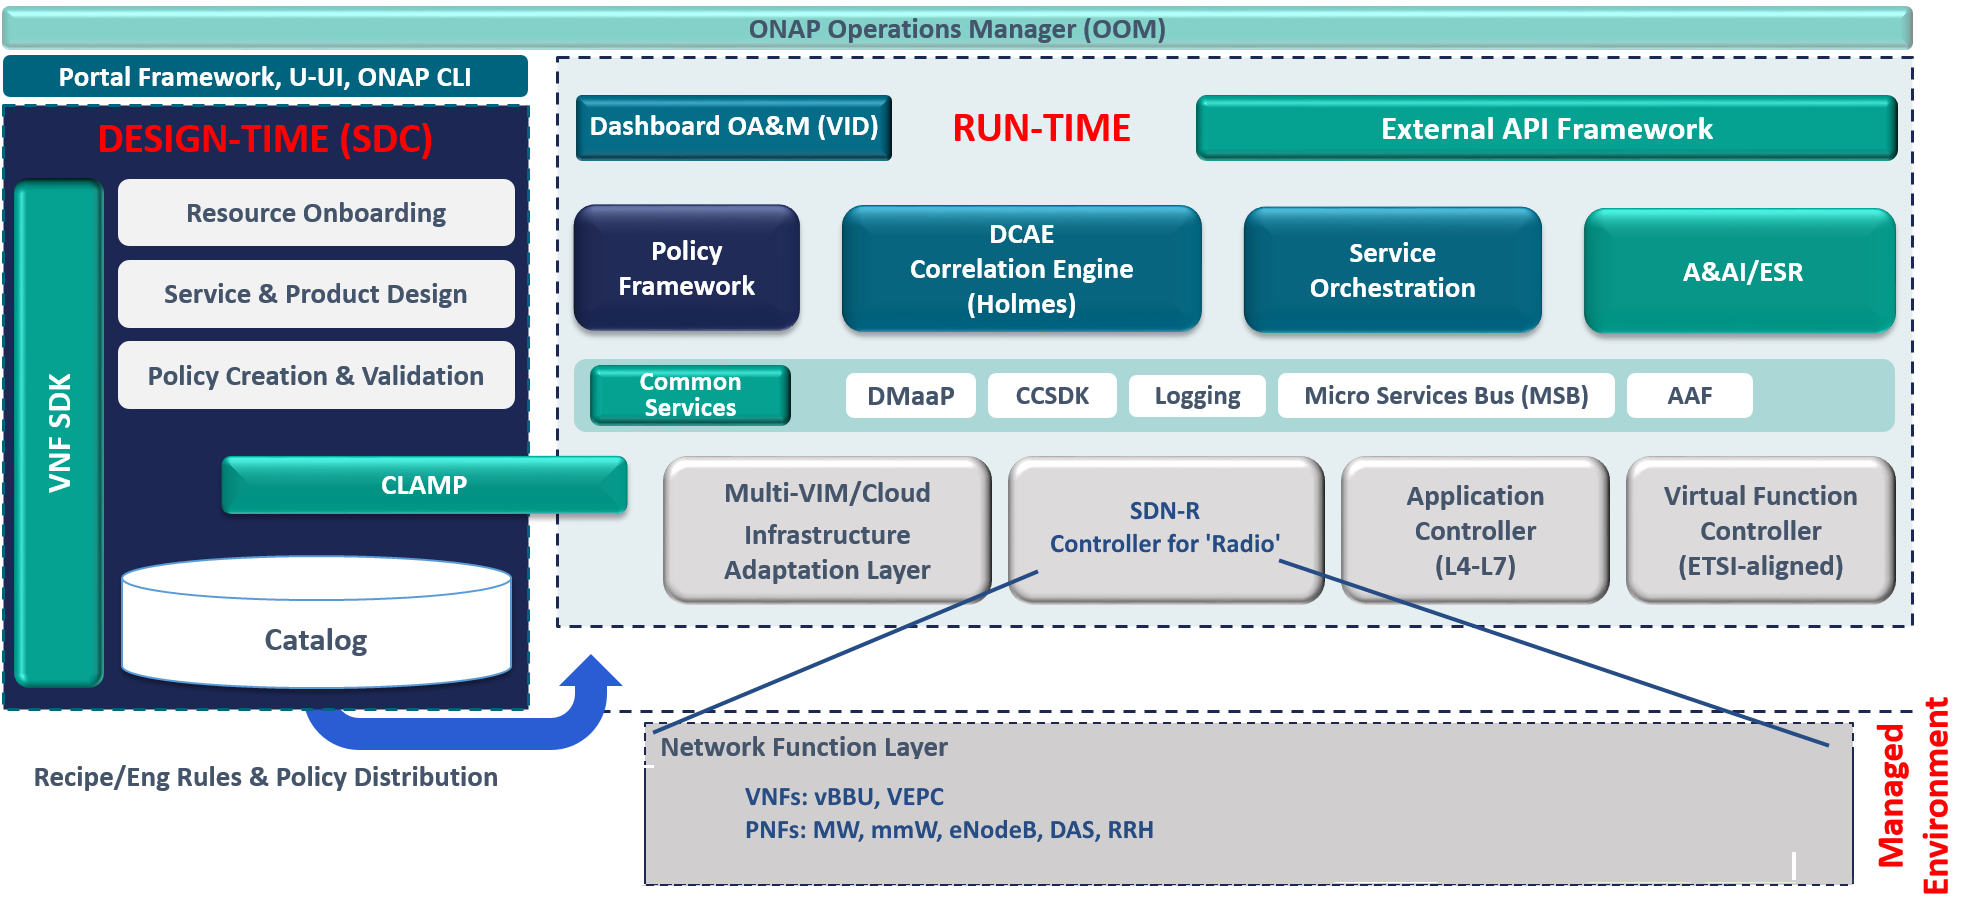 SDN-R in ONAP